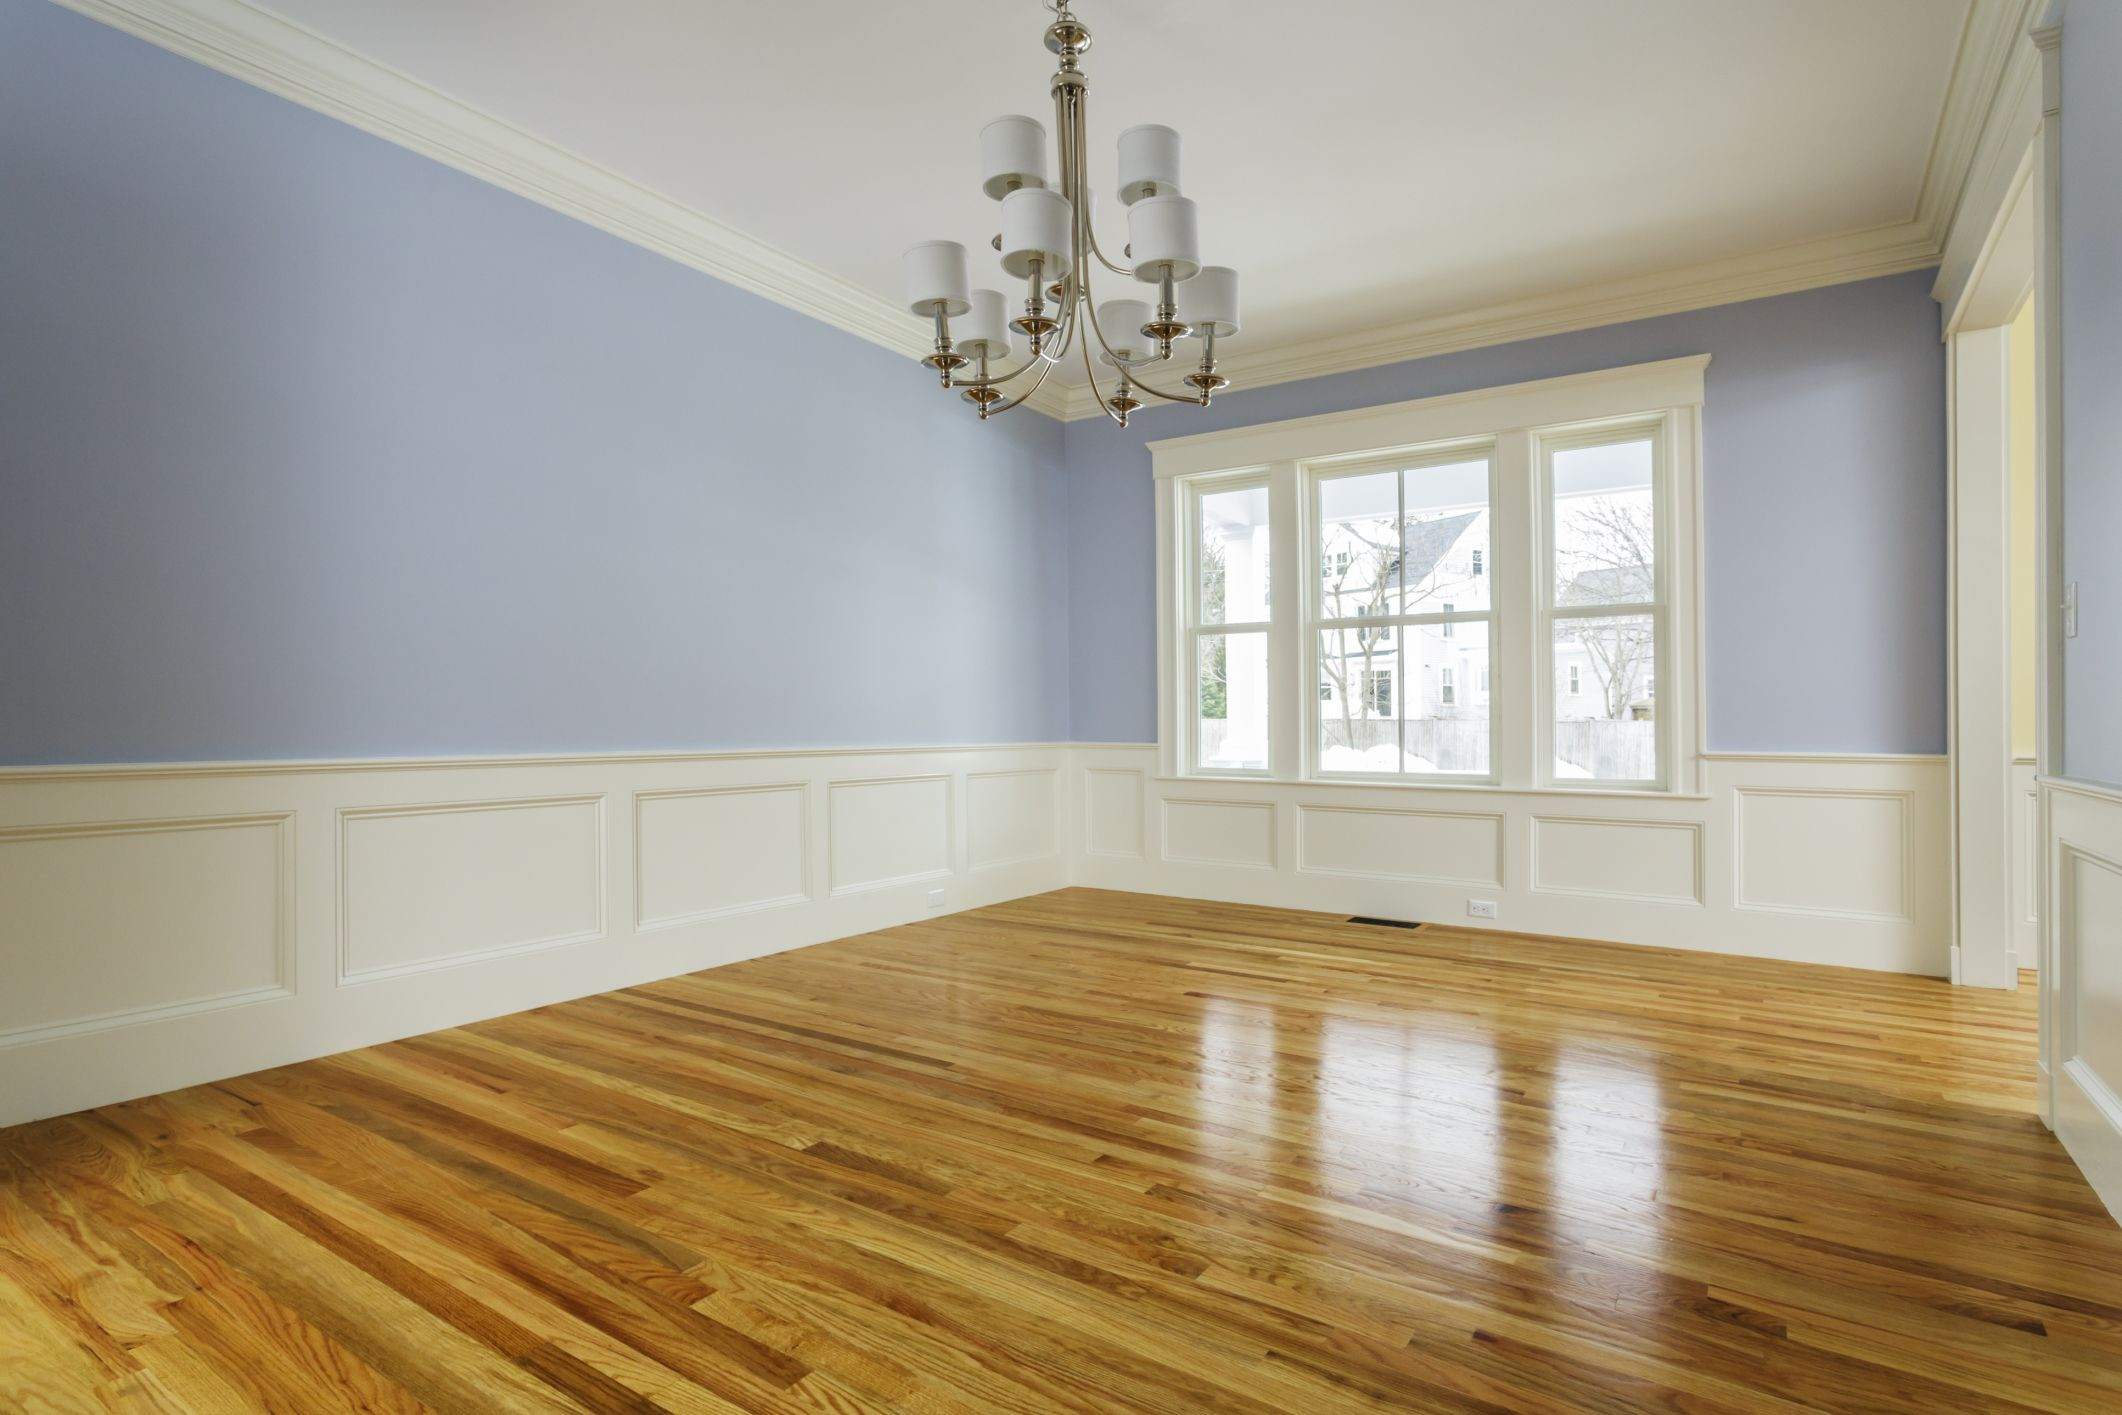 16 Lovely Price for Sanding and Refinishing Hardwood Floors 2022 free download price for sanding and refinishing hardwood floors of the cost to refinish hardwood floors in 168686572 highres 56a2fd773df78cf7727b6cb3